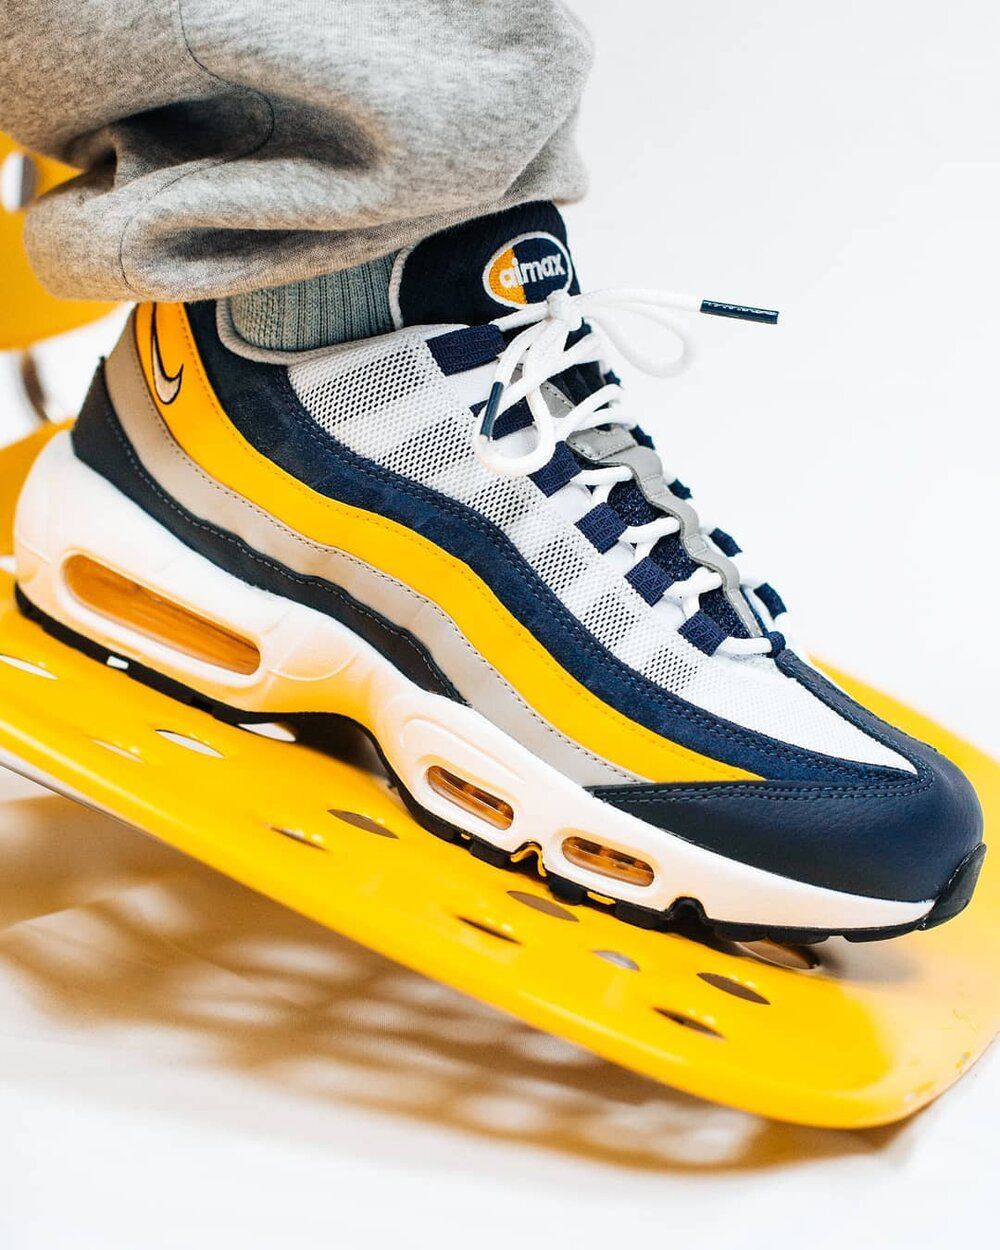 Sneaker Shouts™ on Twitter: "ICYMI: Nike Air Max 95 "Michigan" dropped with free shipping BUY https://t.co/0iZV1SrmM3 / Twitter